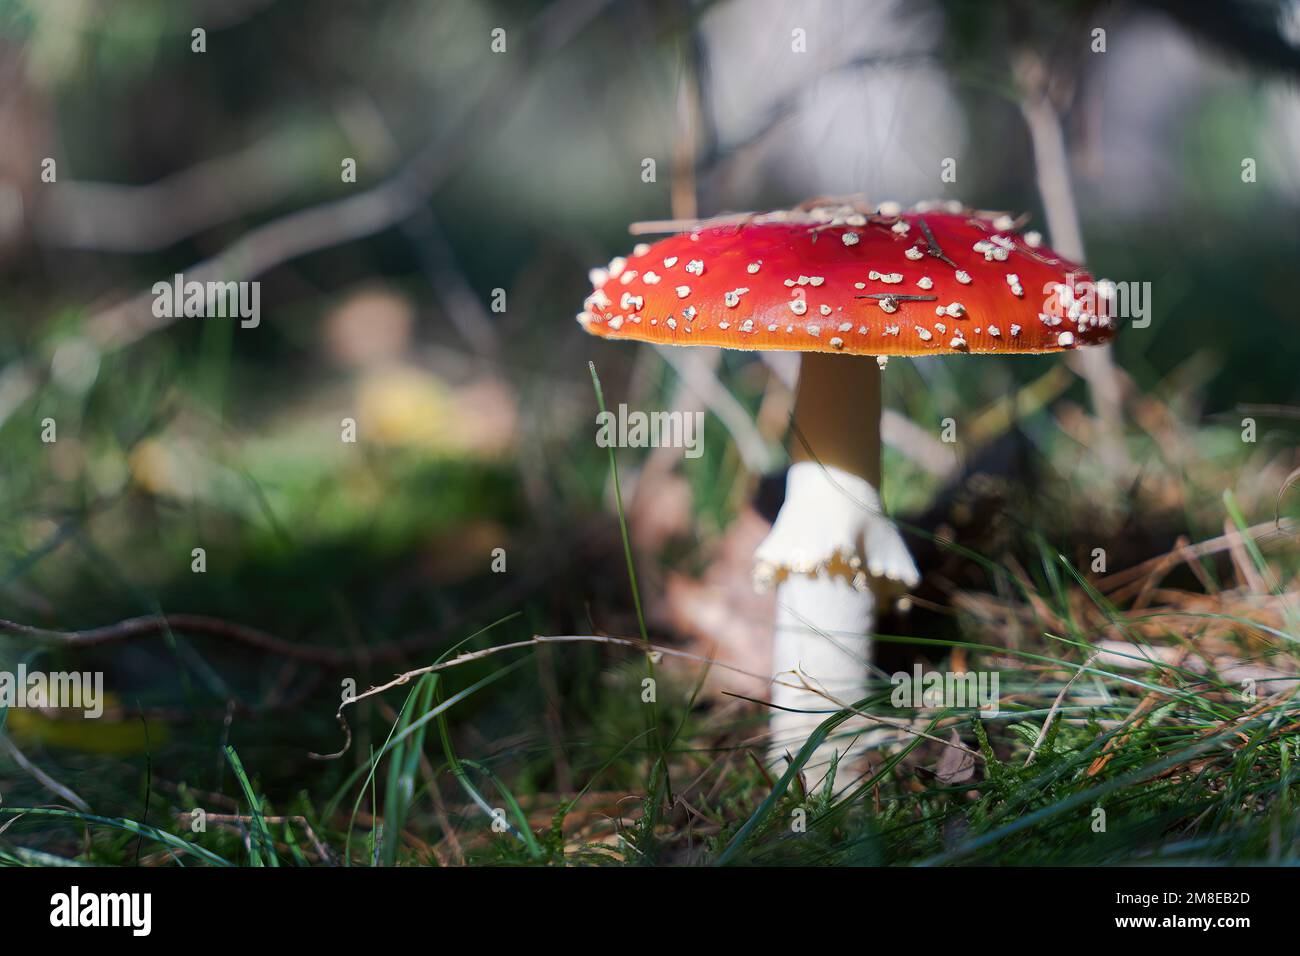 Amanita muscaria or fly agaric mushroom, psychoactive toadstool with red cap and white spots. Red cap fungus Stock Photo